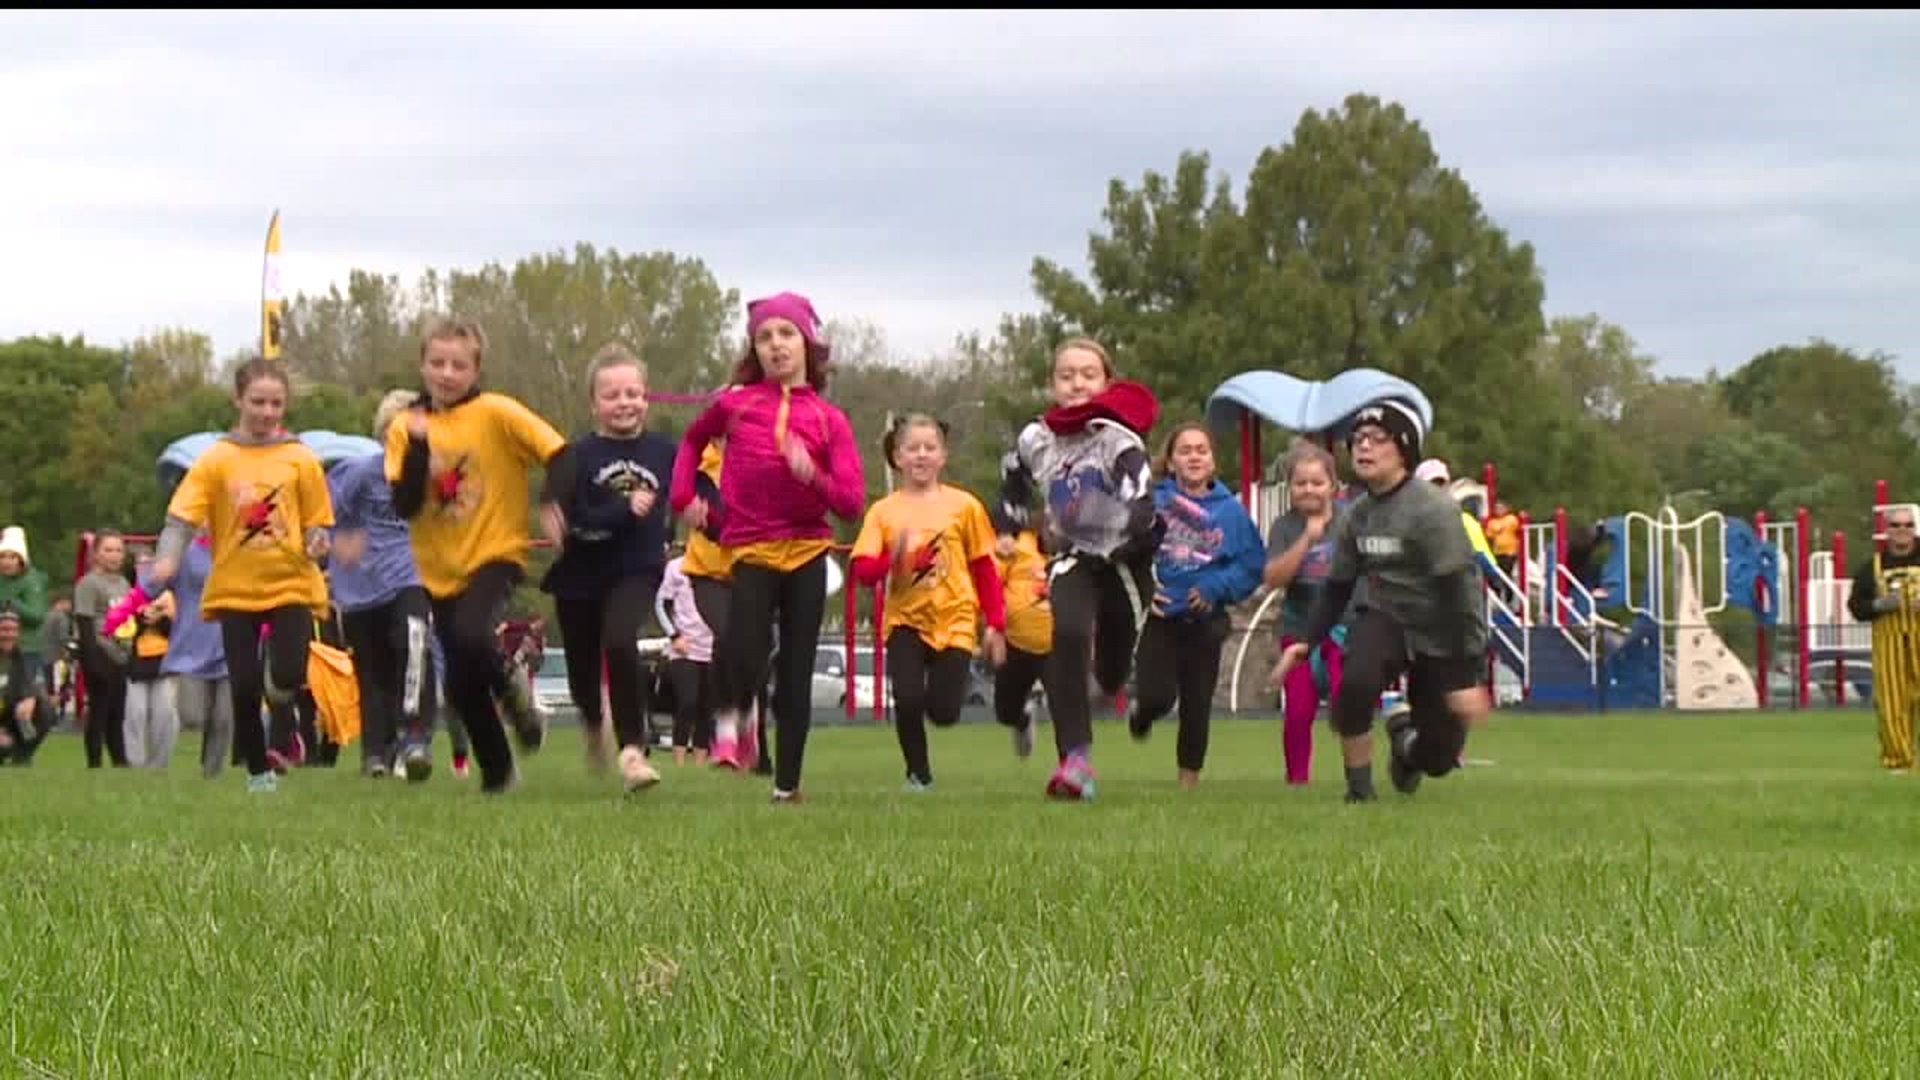 Mini-heroes and their parents get moving for Down Syndrome awareness and fundraising